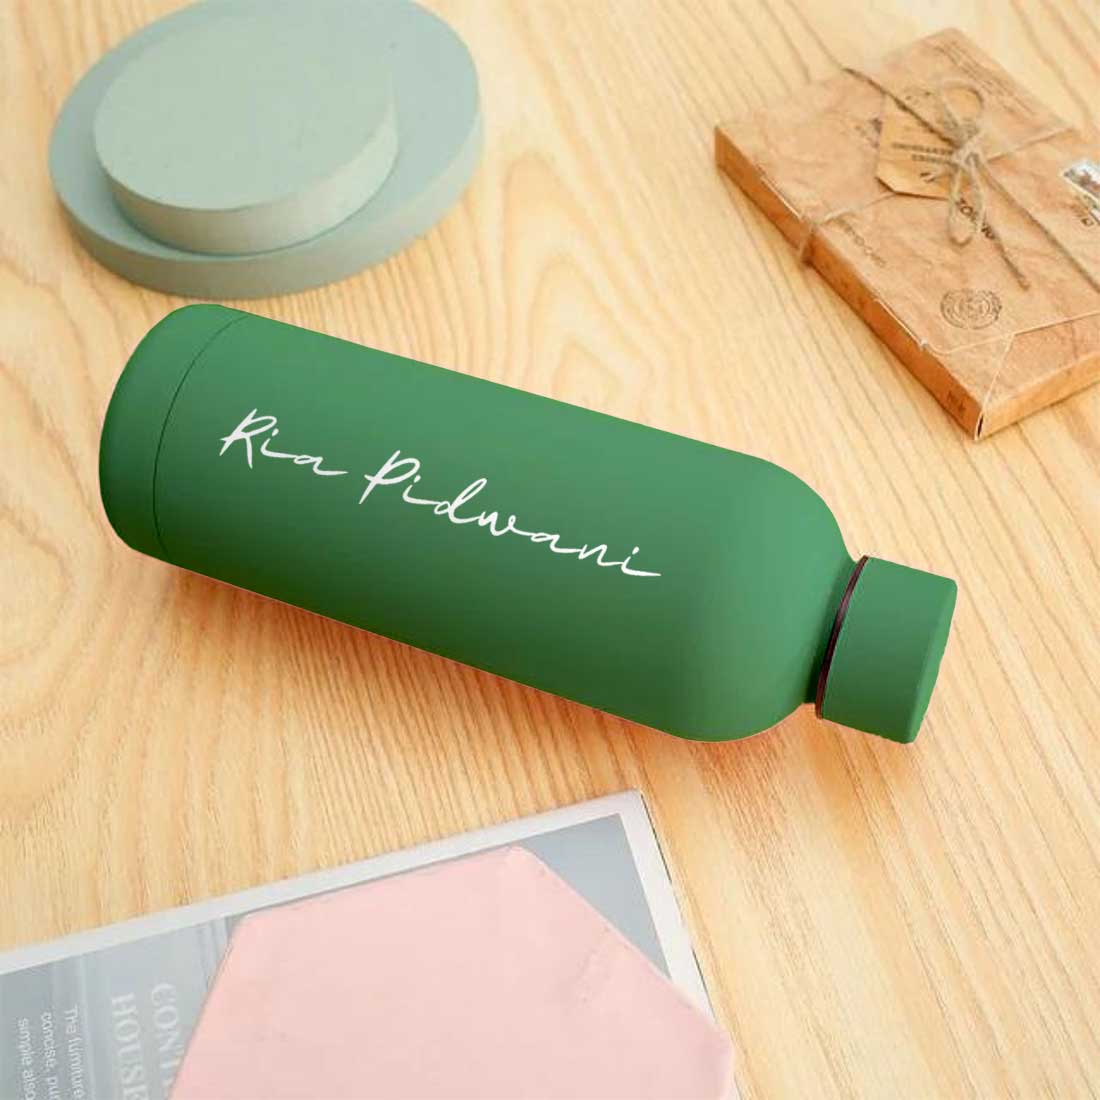 Customized Water Bottles with Names Stainless Steel Double Insulated Water Bottles for Travel Office Gym Home - BPA Free, Leakproof